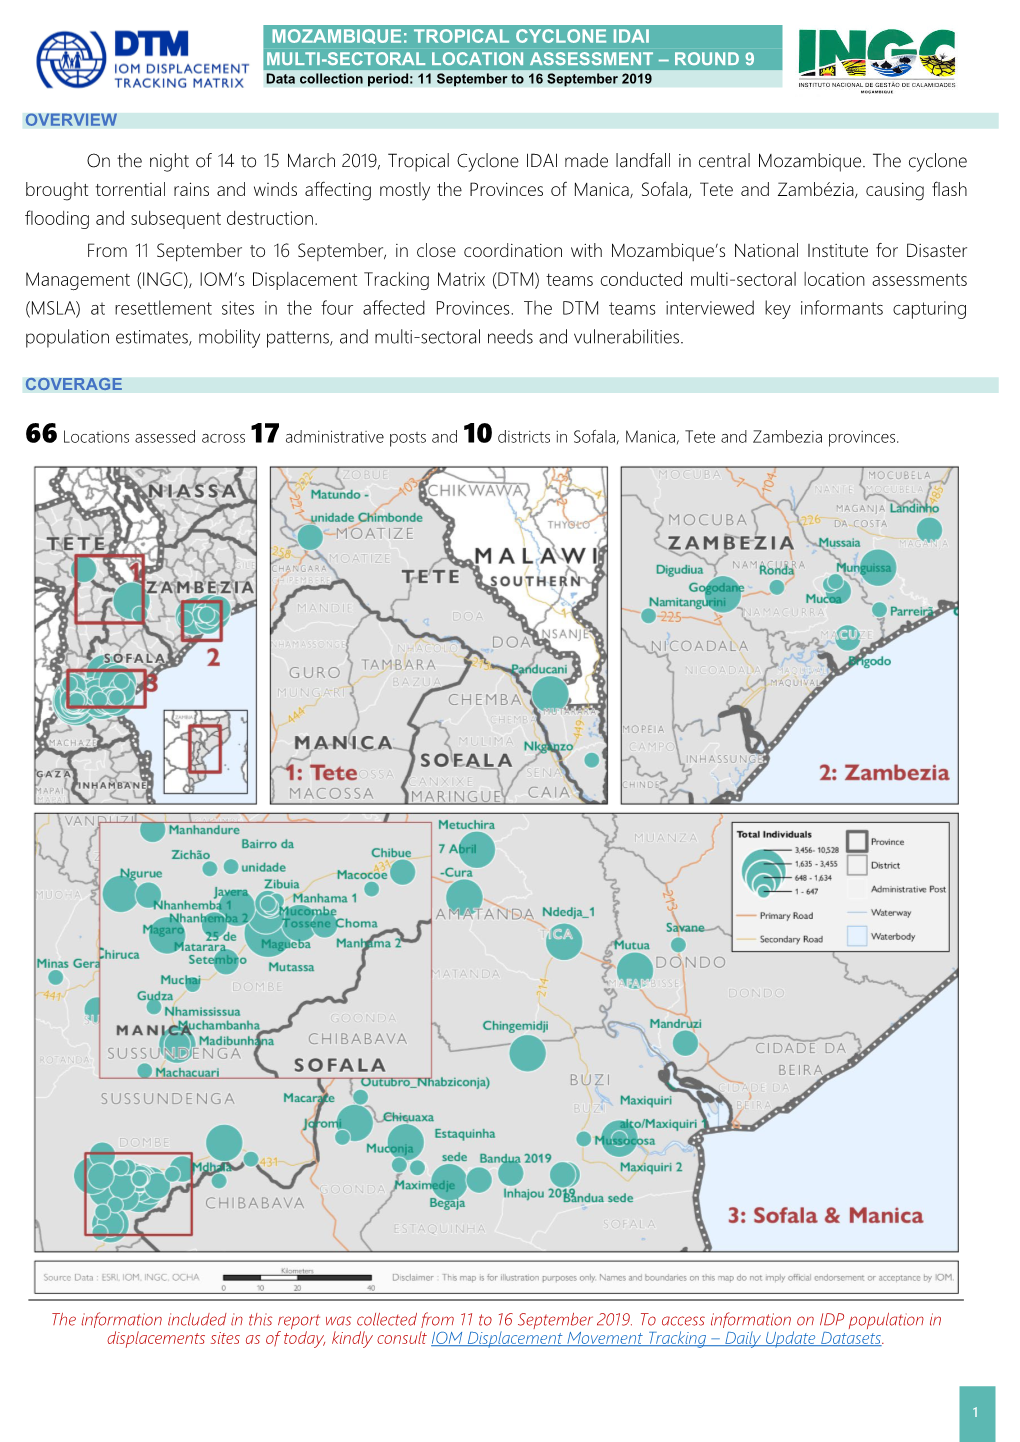 MOZAMBIQUE: TROPICAL CYCLONE IDAI MULTI-SECTORAL LOCATION ASSESSMENT – ROUND 9 Data Collection Period: 11 September to 16 September 2019